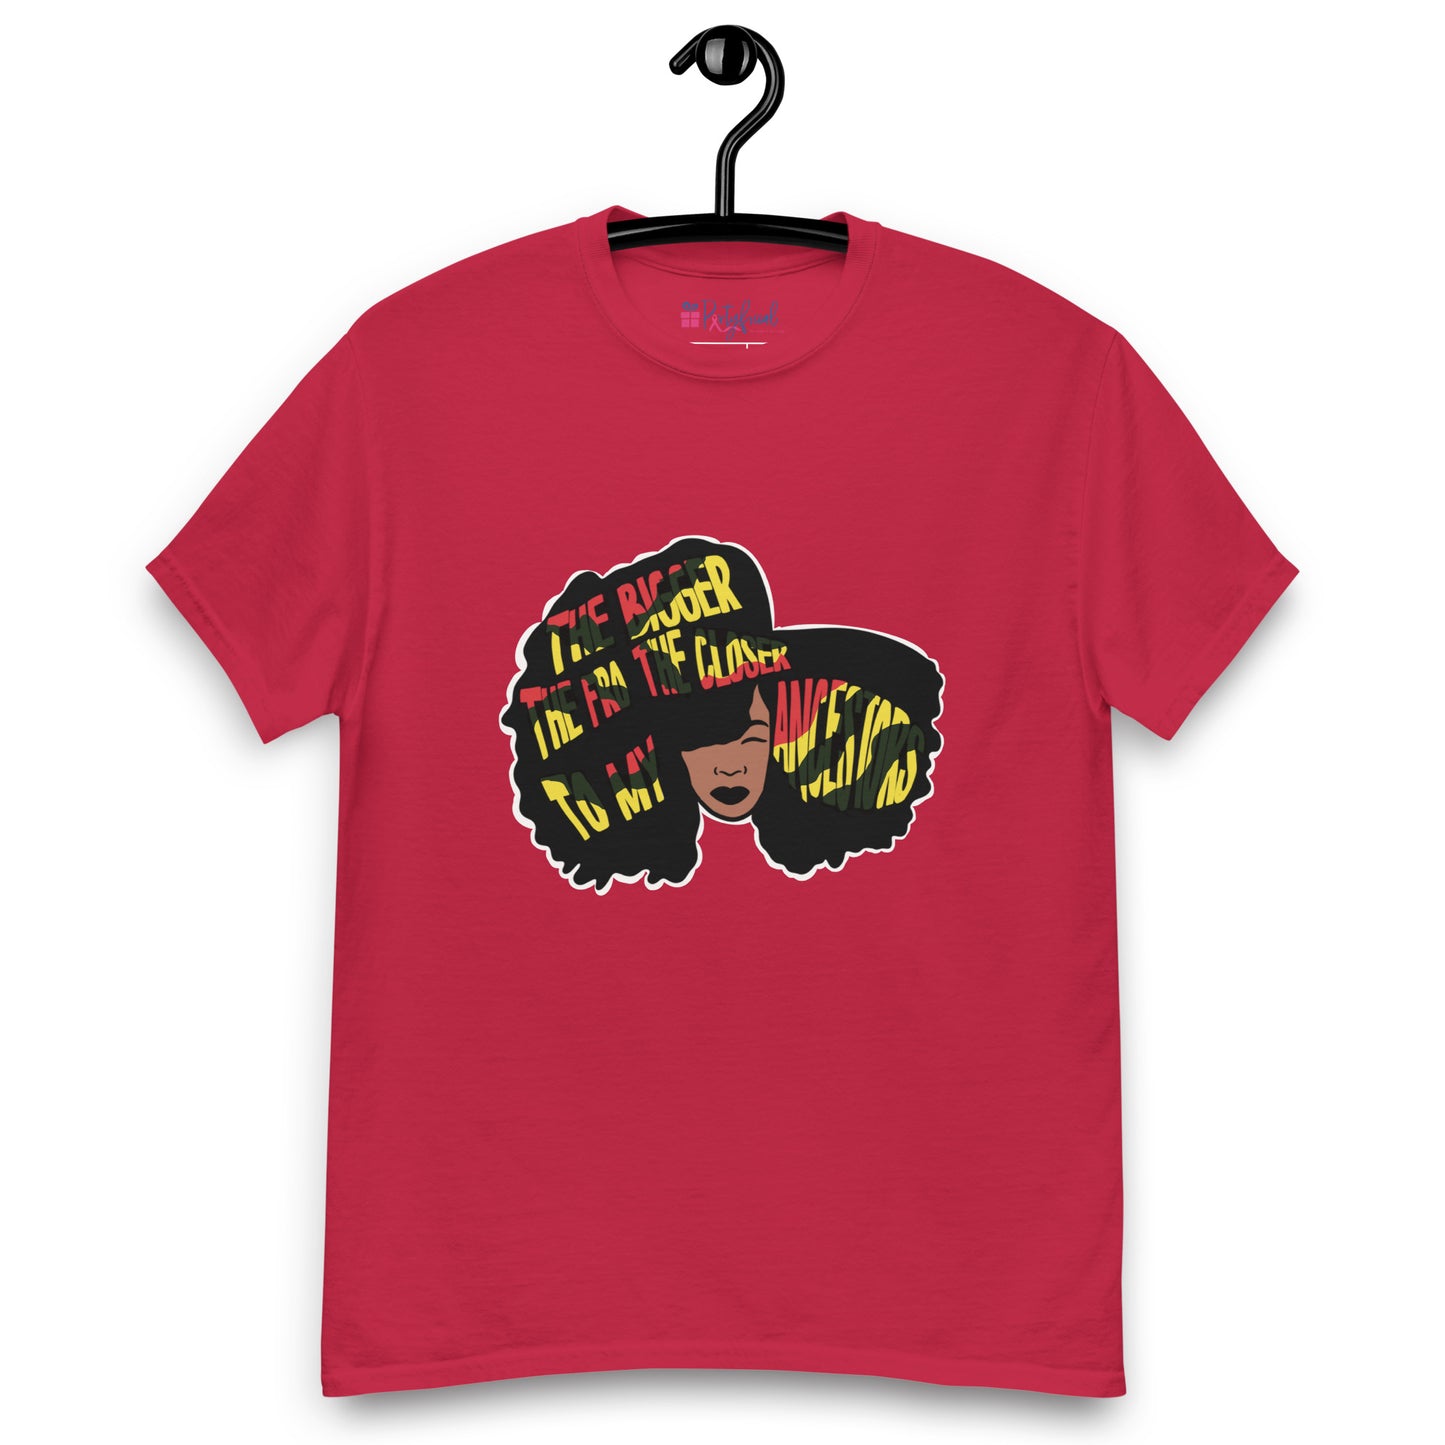 Juneteenth Fro classic tee